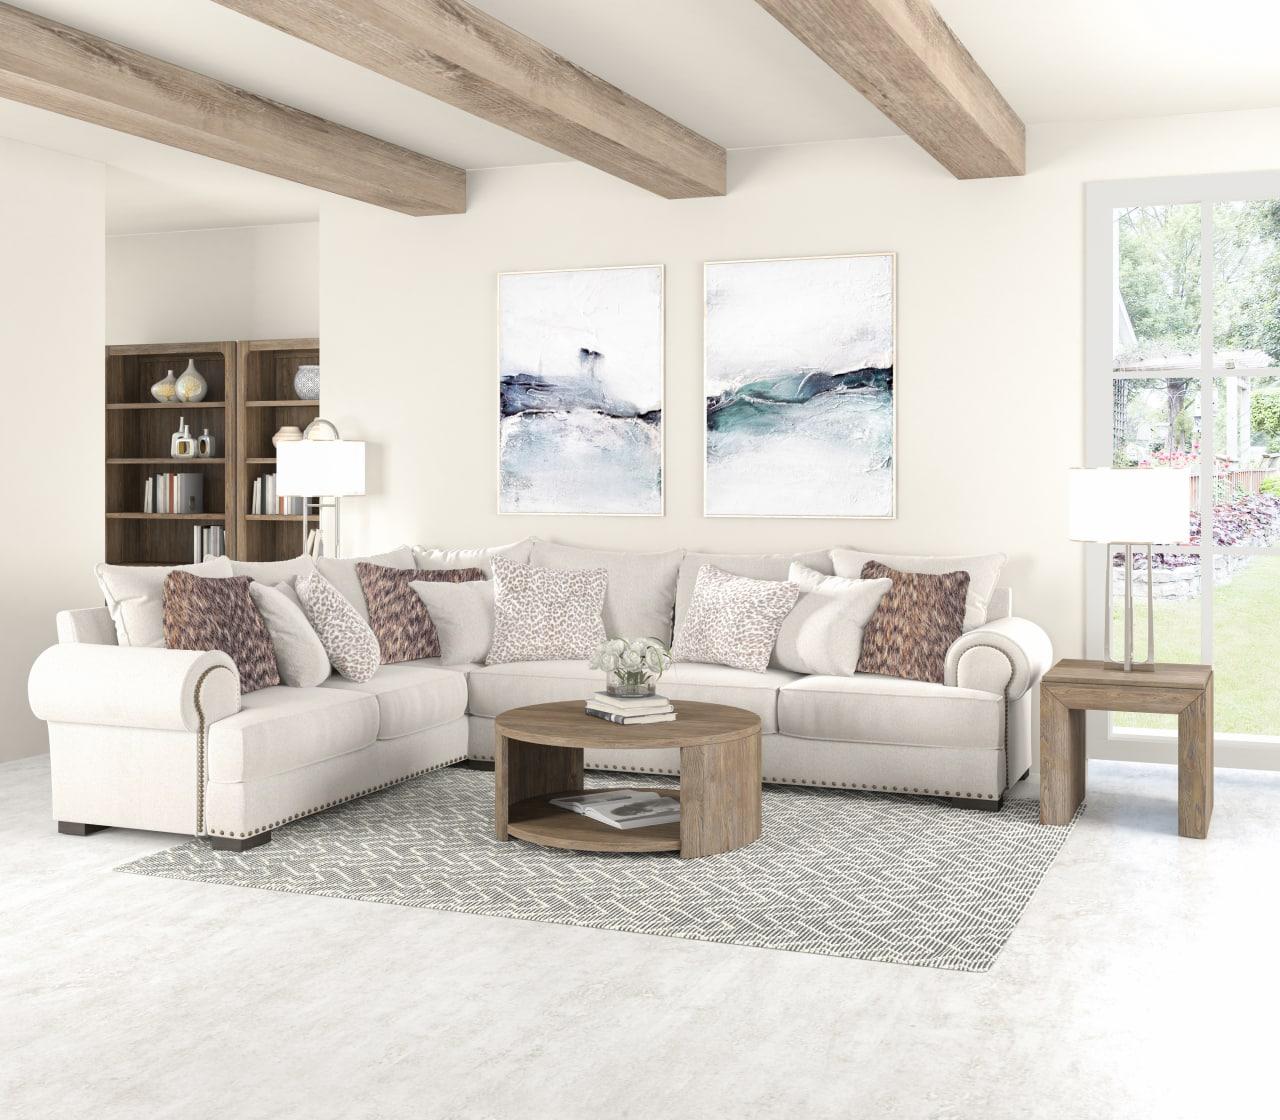 

    
780529-5012C7S2 Beige Fabric Sectional Sofa w/ Accent Pillows by A.R.T. Furniture Scully Berens
